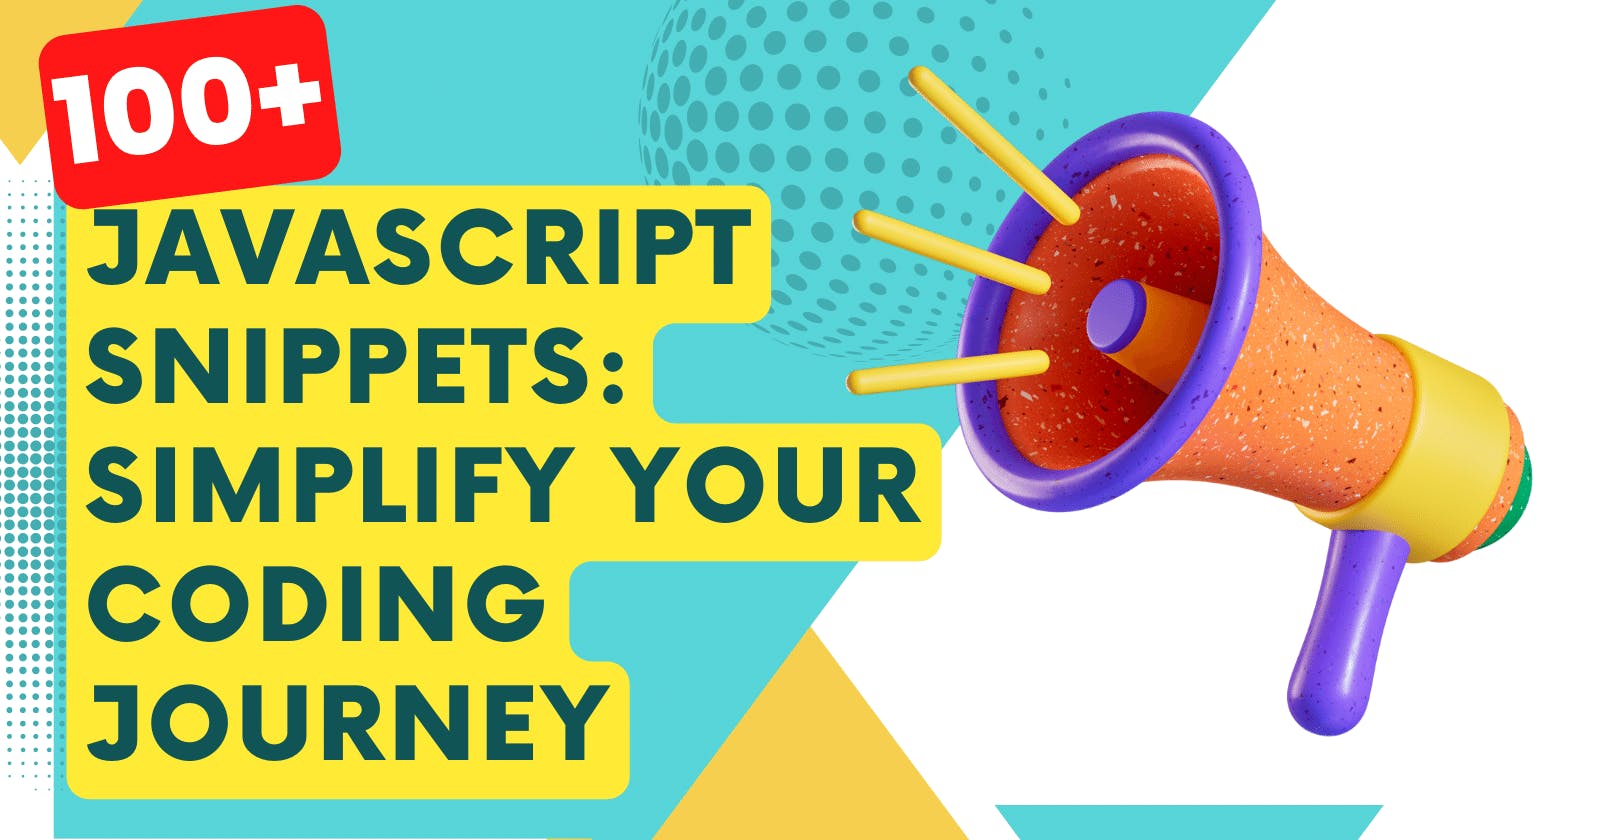 100+ JavaScript Snippets for Beginners: Simplify Your Coding Journey